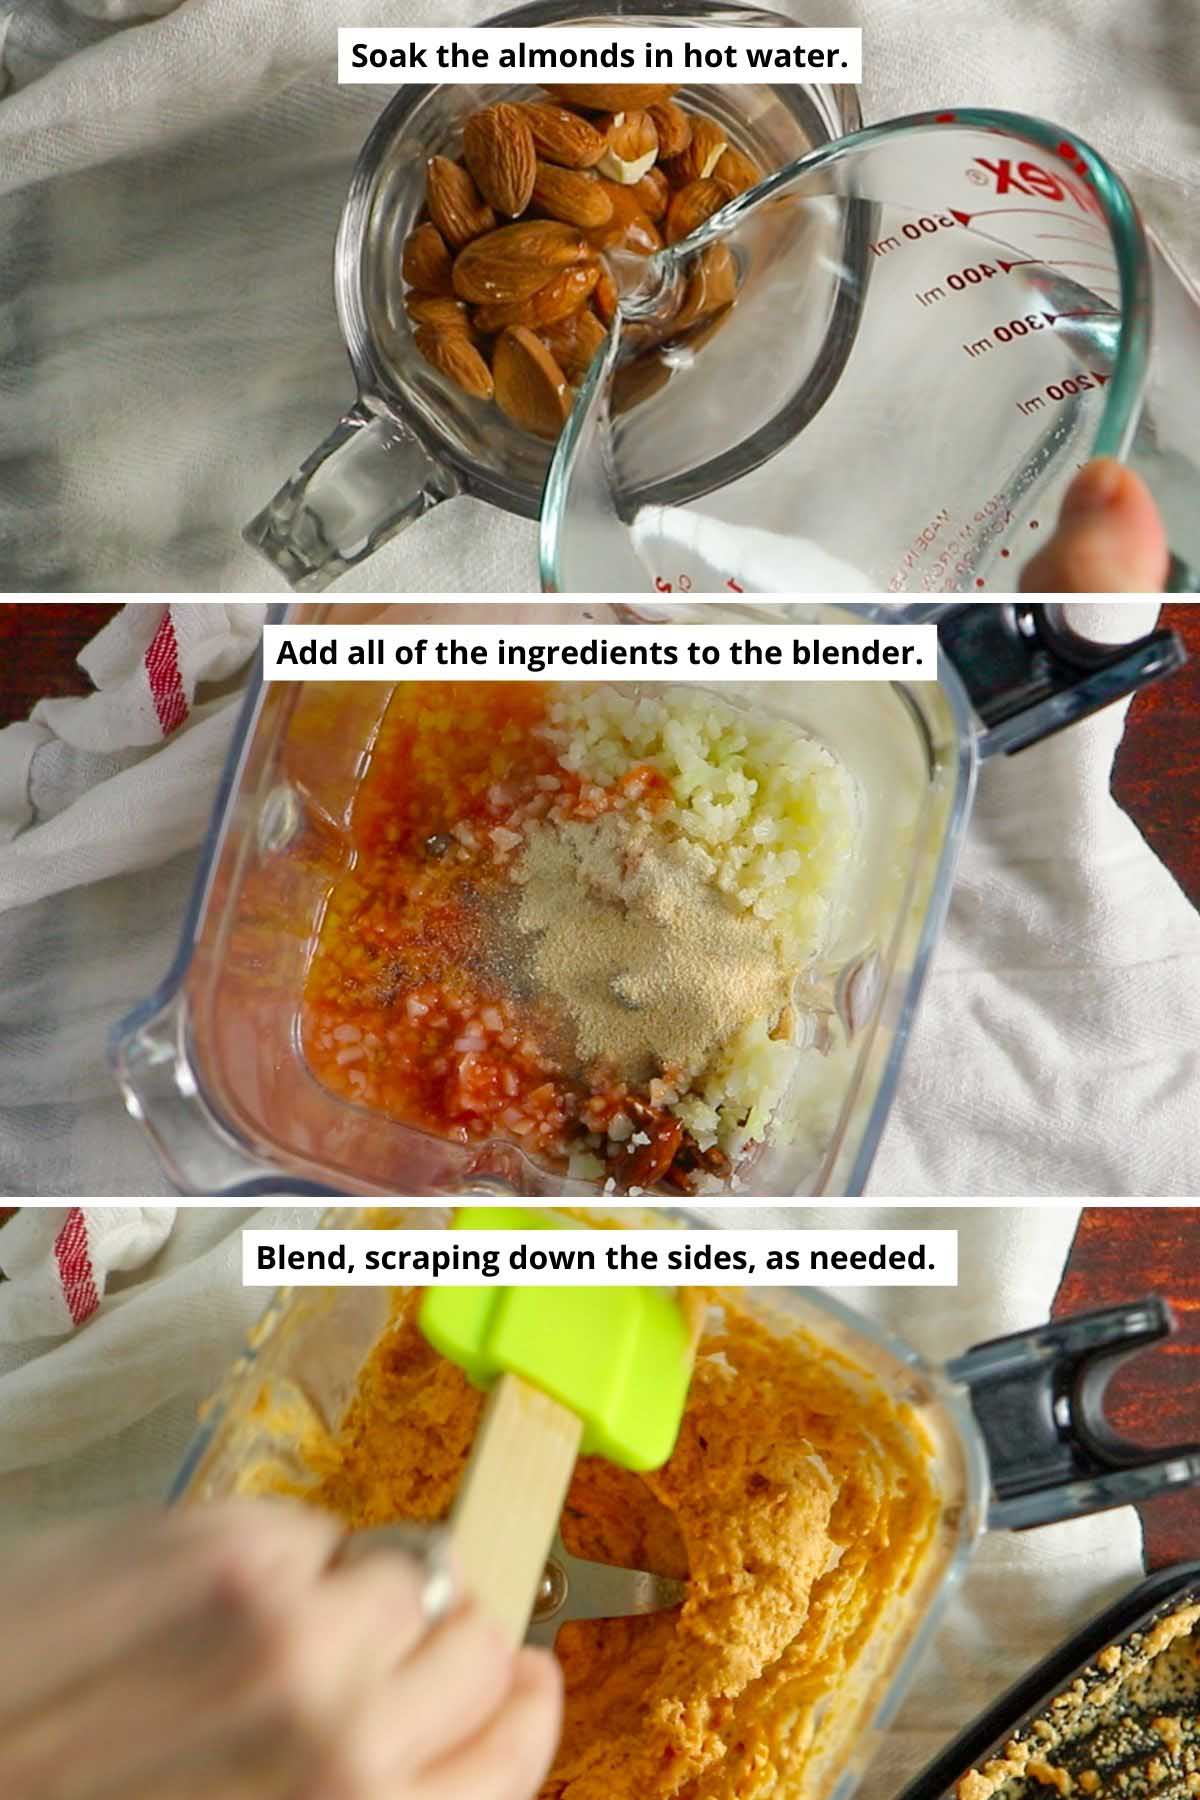 image collage showing soaking the almonds, adding the ingredients to the blender, and scraping down the sides of the blender